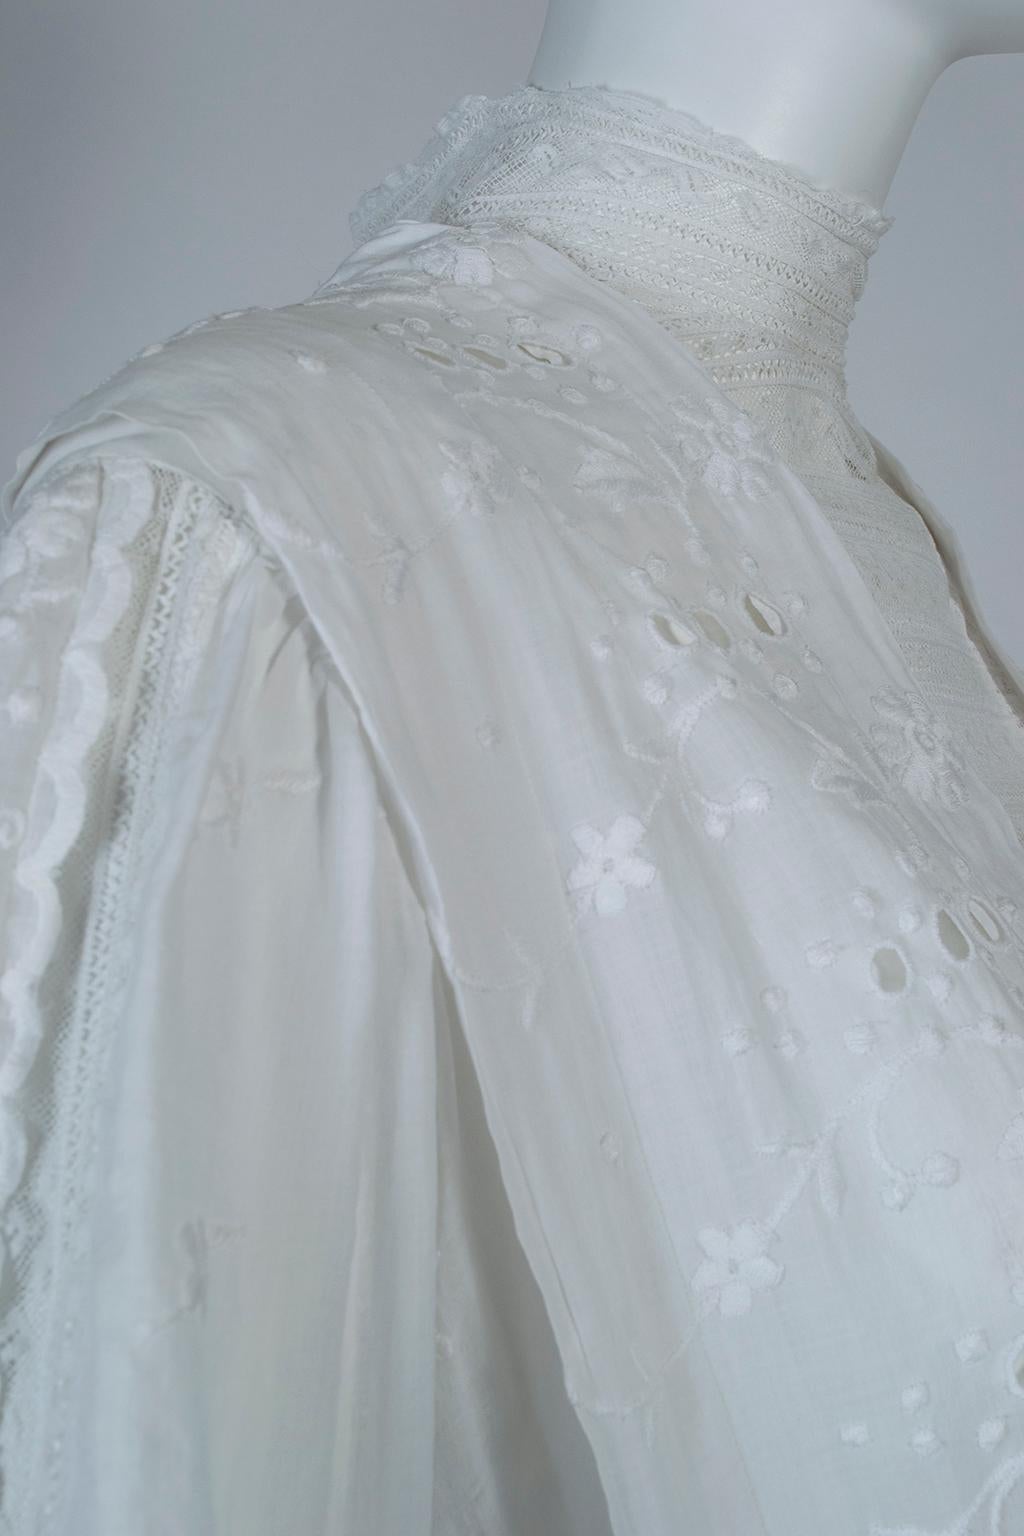 Victorian White Eyelet and Lace Shoulder Pleat Afternoon Tea Dress - M, 1880s 2